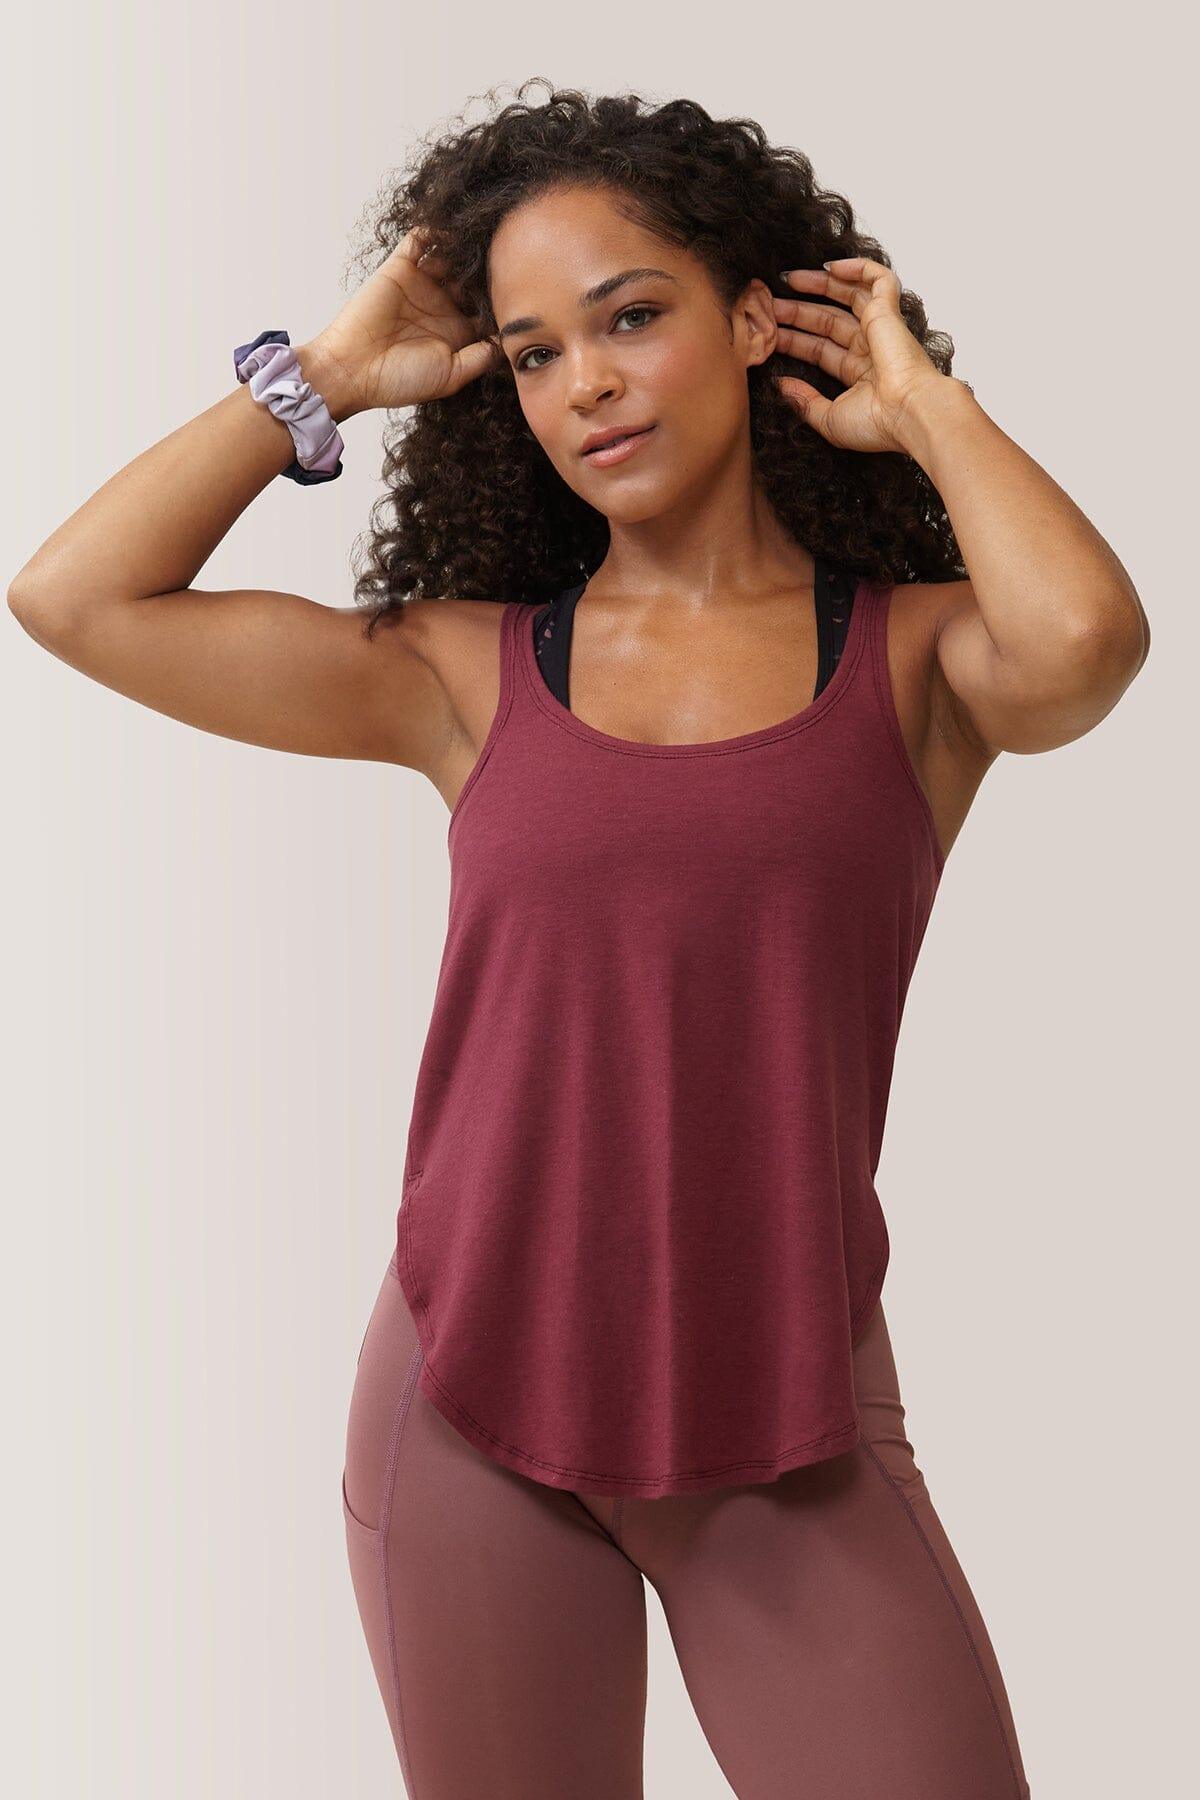 Femme qui porte la camisole Hello Gorgeous! de Rose Boreal./ Women wearing the Hello Gorgeous! Tank Top from Rose Boreal. -Cassis